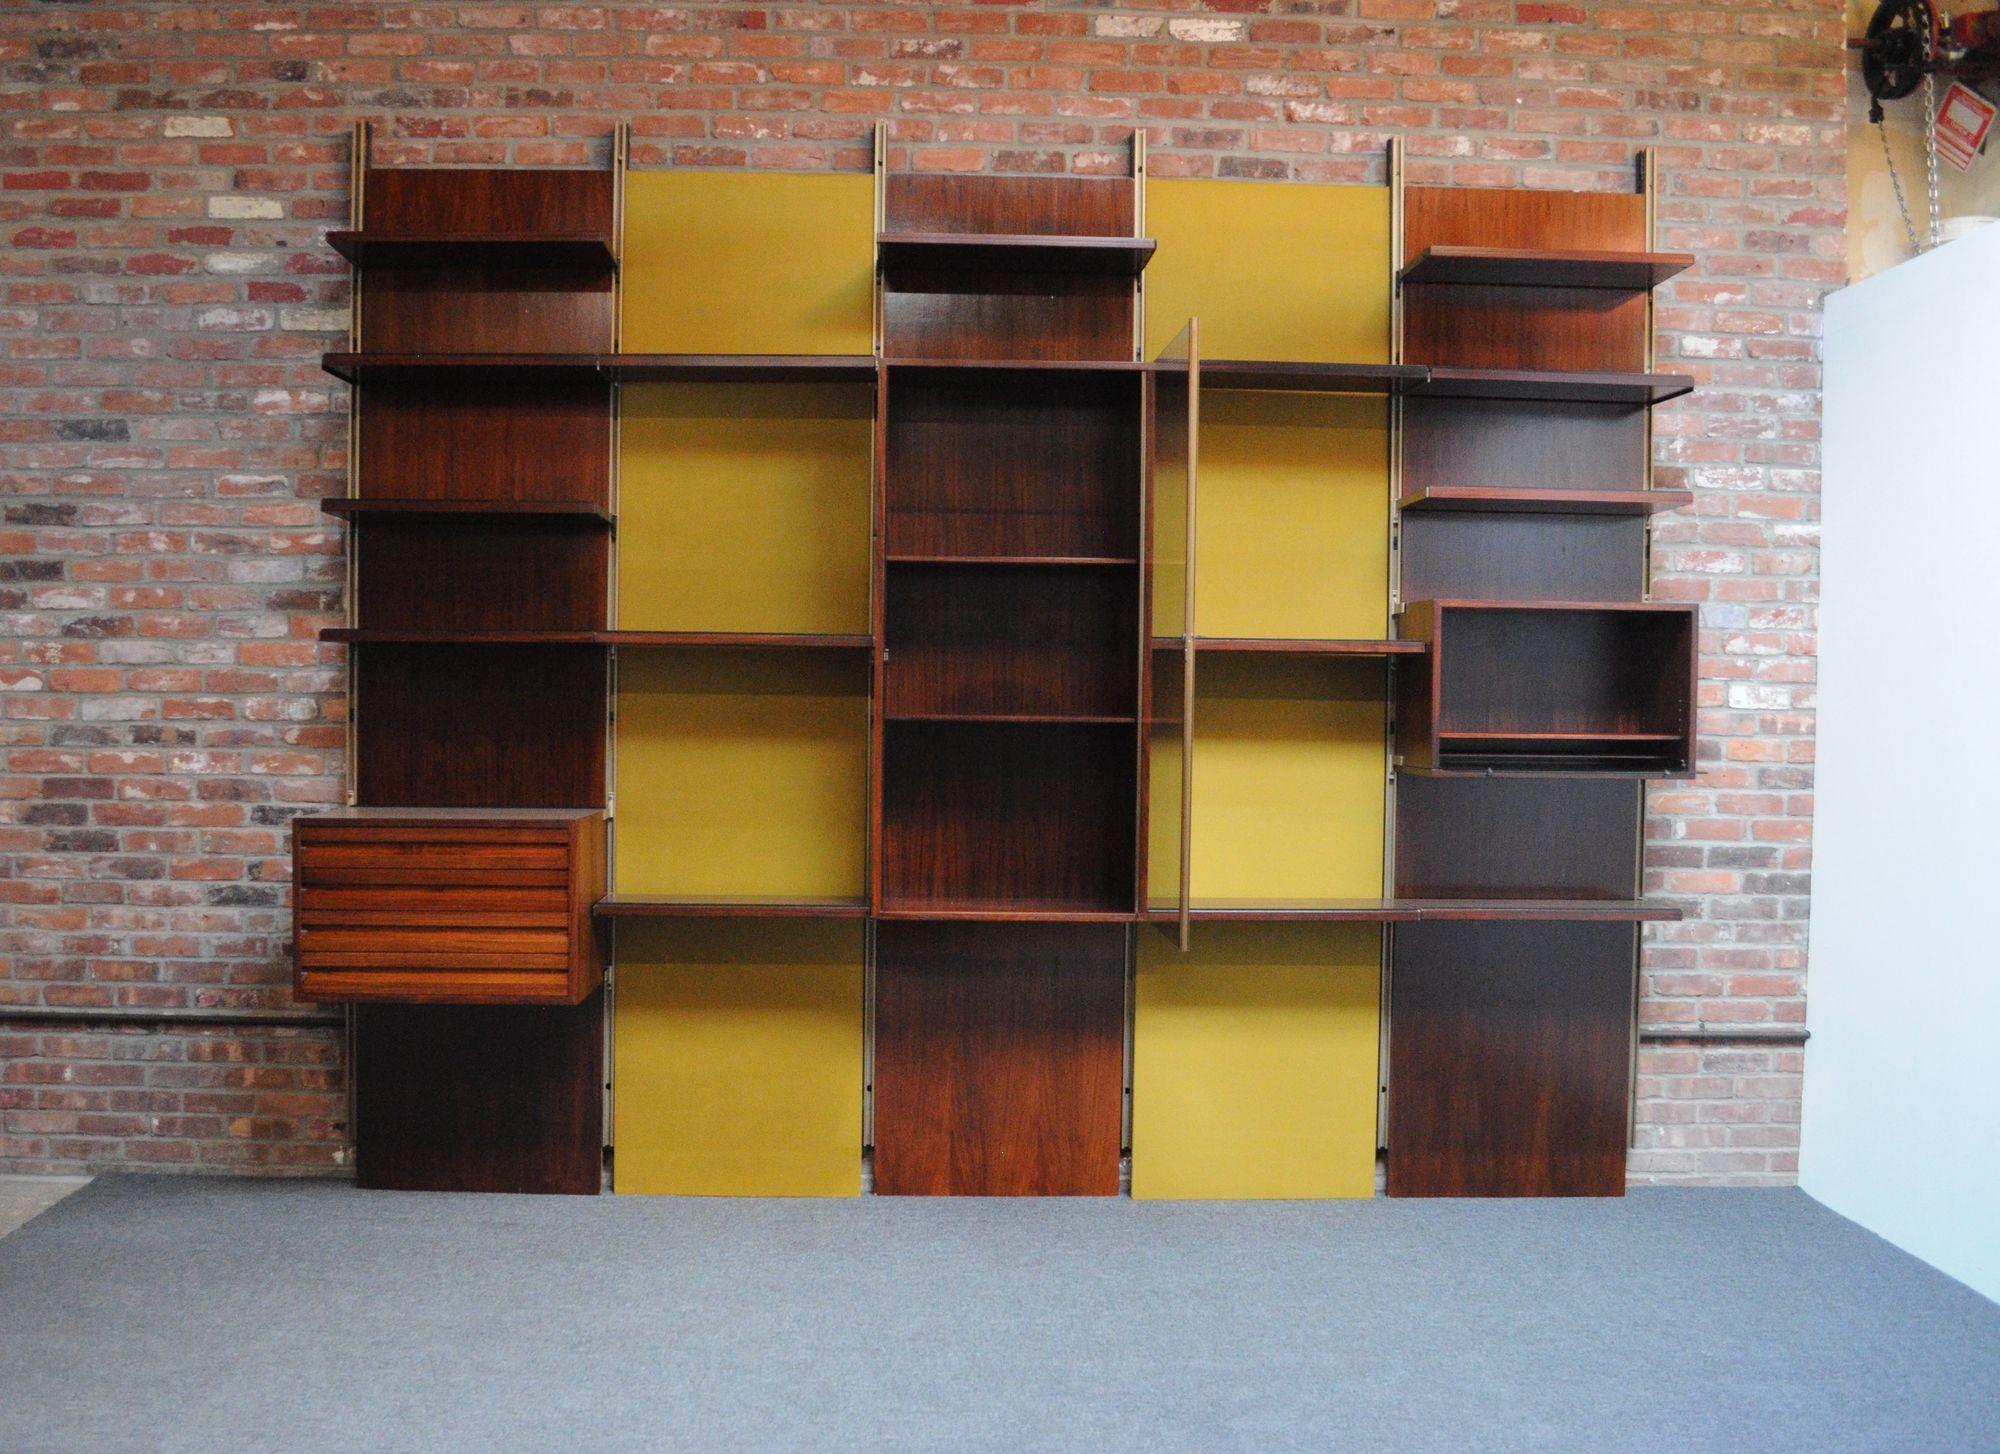 Large modular rosewood bookcase/wall unit by Osvaldo Borsani for Tecno (ca. 1960, Italy).
Composed of six gold aluminum uprights forming five bays/sections with the five original, removable panel backings in alternating ochre velvet and rosewood